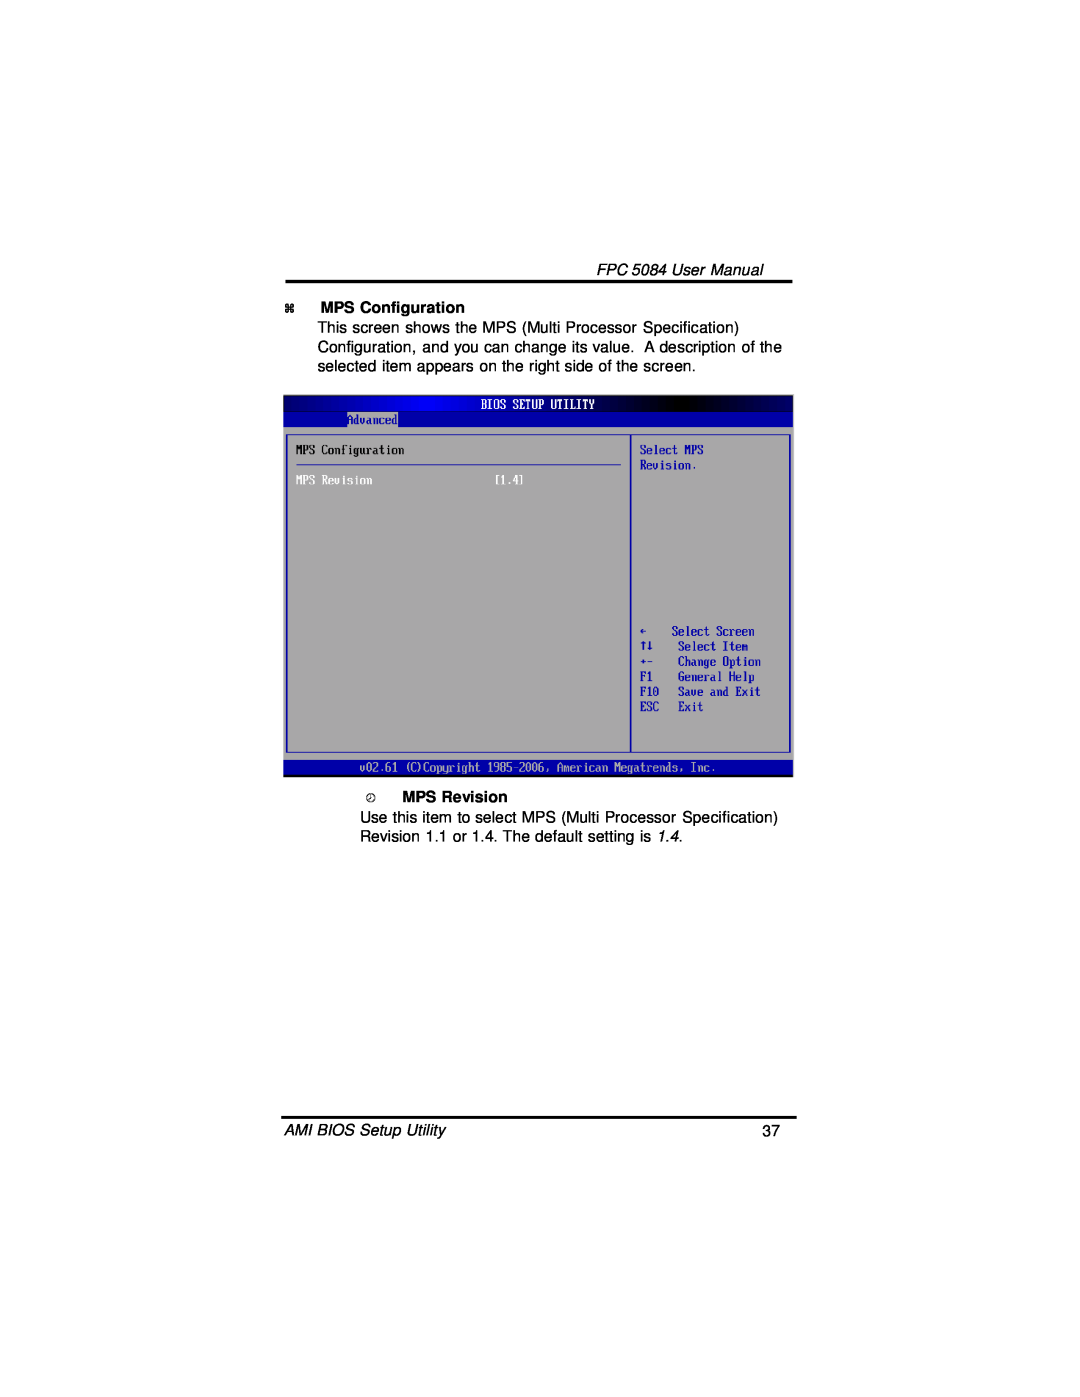 Intel N270, FPC 5084 user manual MPS Configuration, MPS Revision 